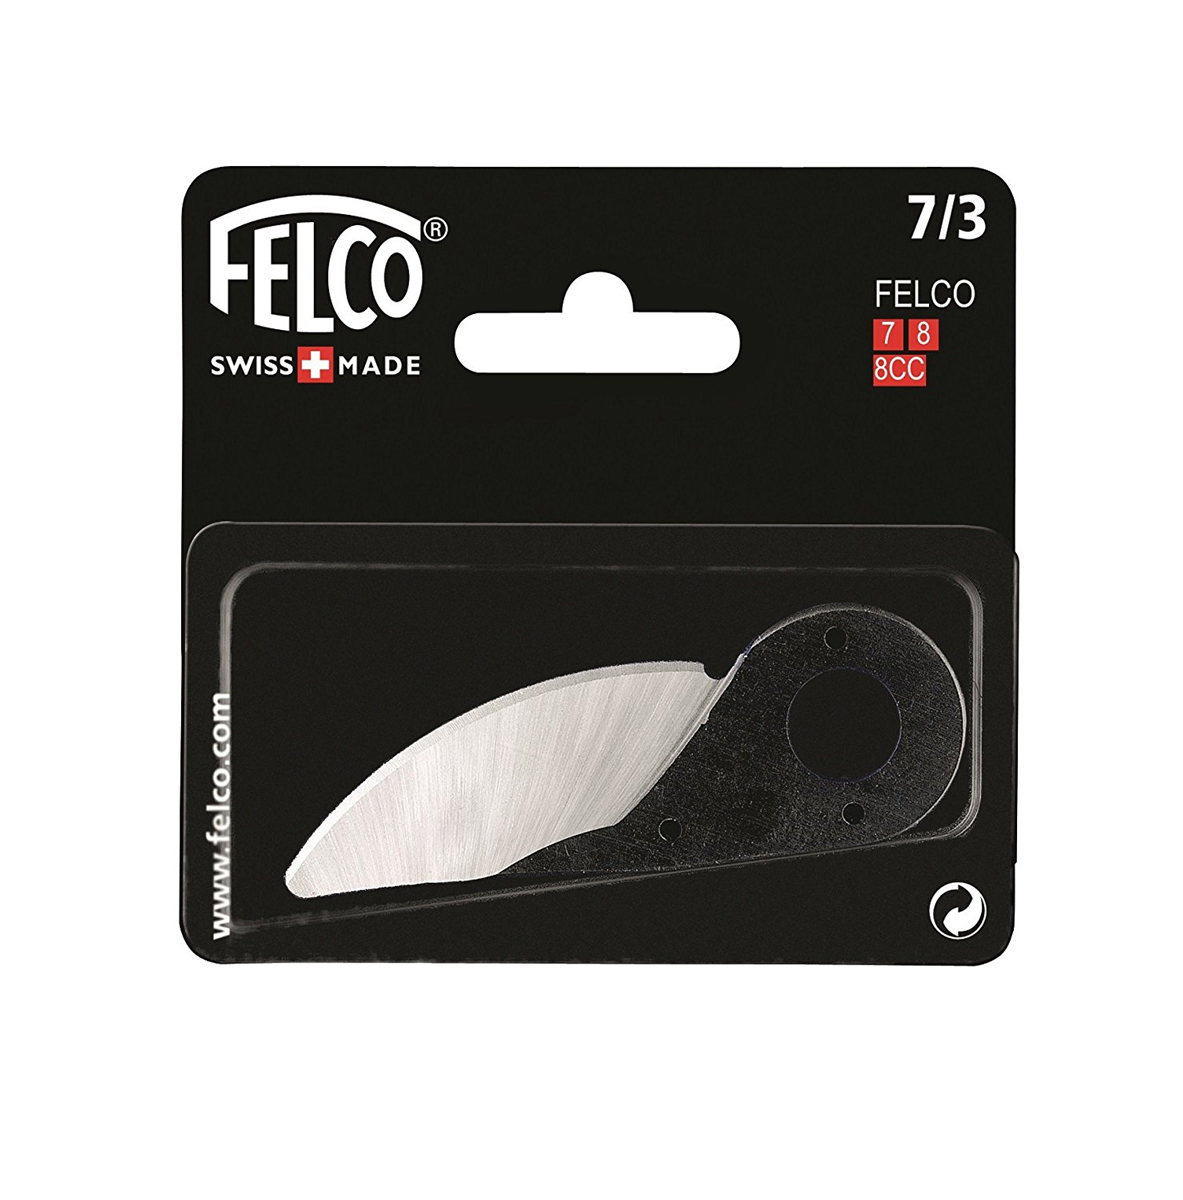 7-3 Cutting Blade for F 7 8 Felco - Pruners